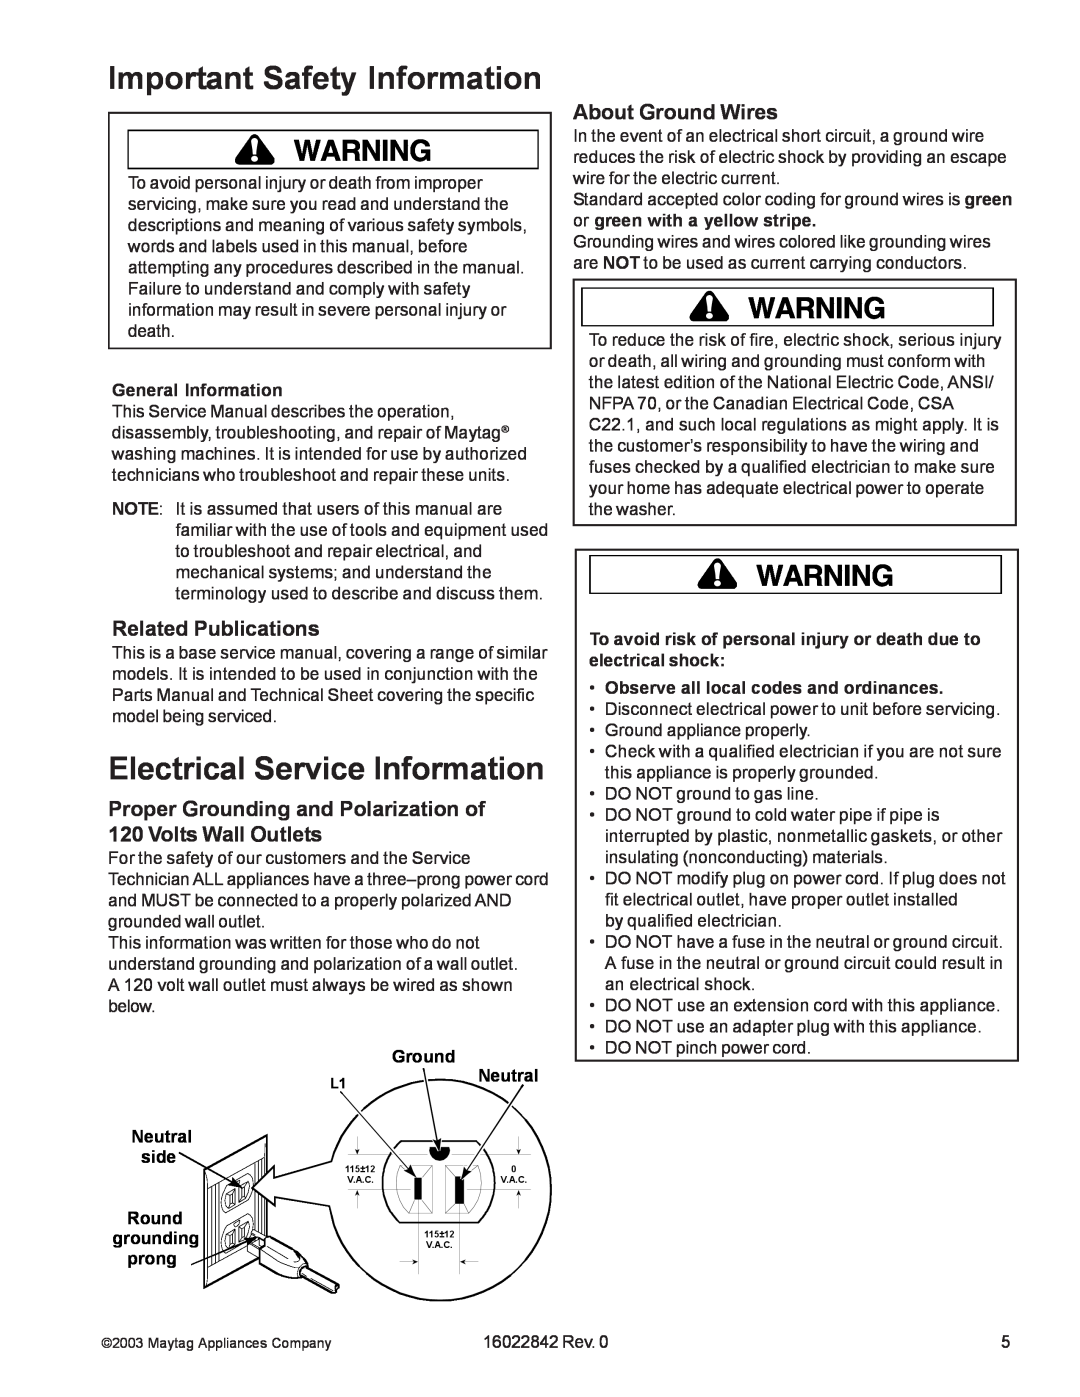 Maytag MAT12PSA Electrical Service Information, Related Publications, About Ground Wires, Important Safety Information 